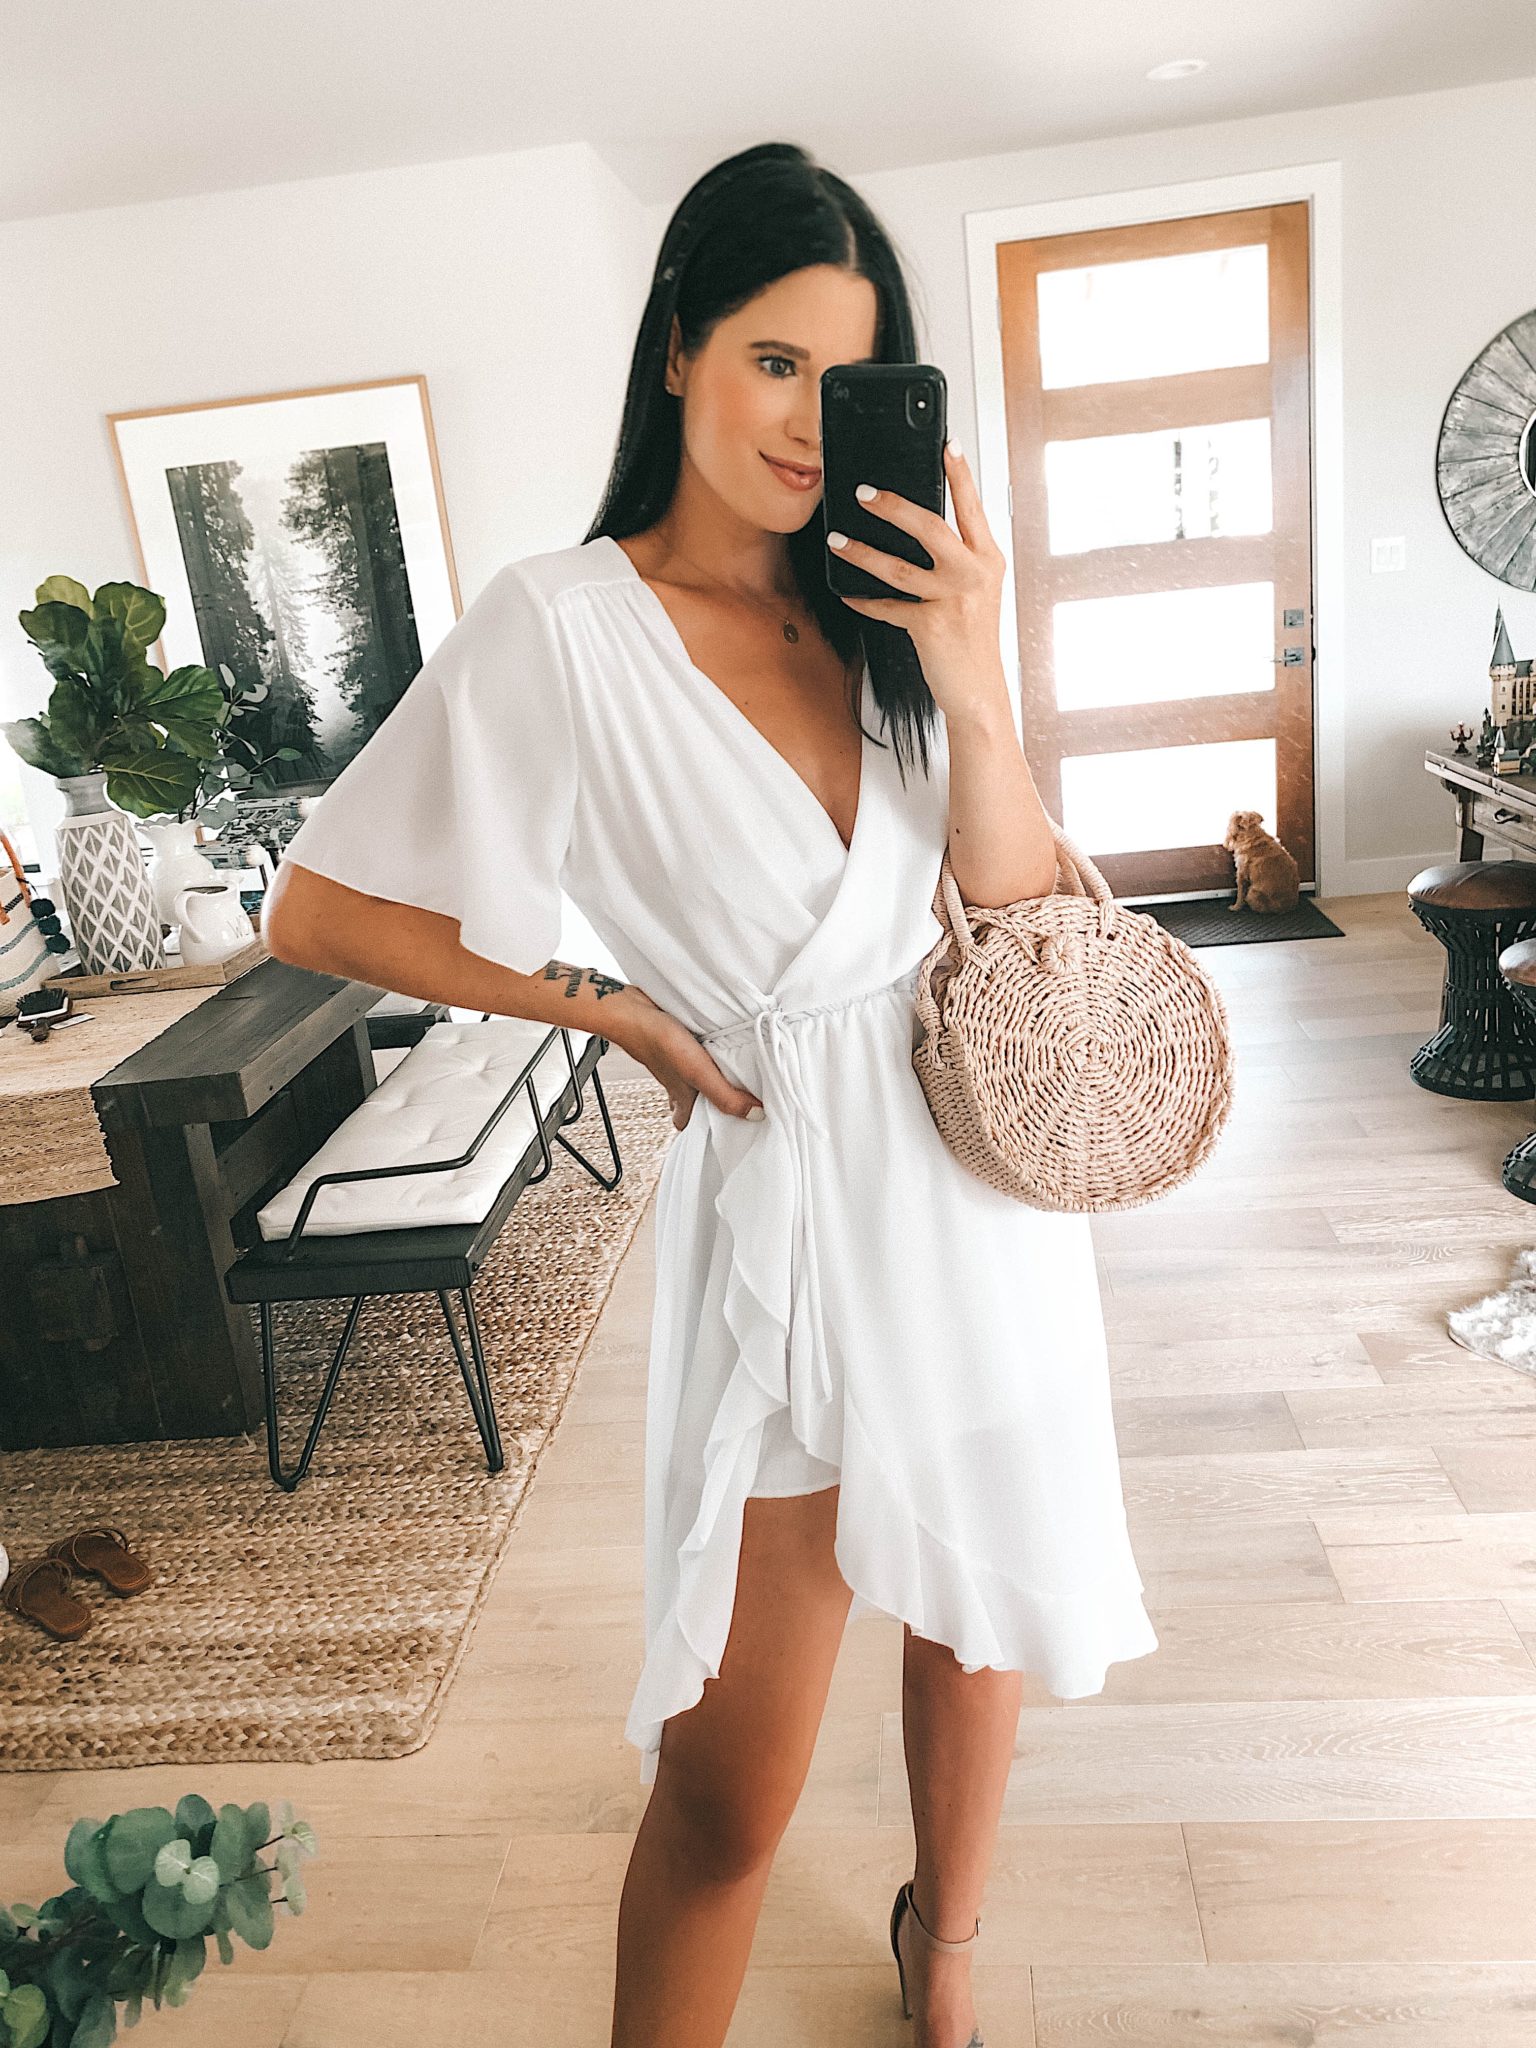 5 Affordable Summer Outfits from Walmart by popular Austin fashion blog, Dressed to Kill: image of a woman standing inside and wearing a white LA Gypsy Women's Midi Front Ruffled Dress.